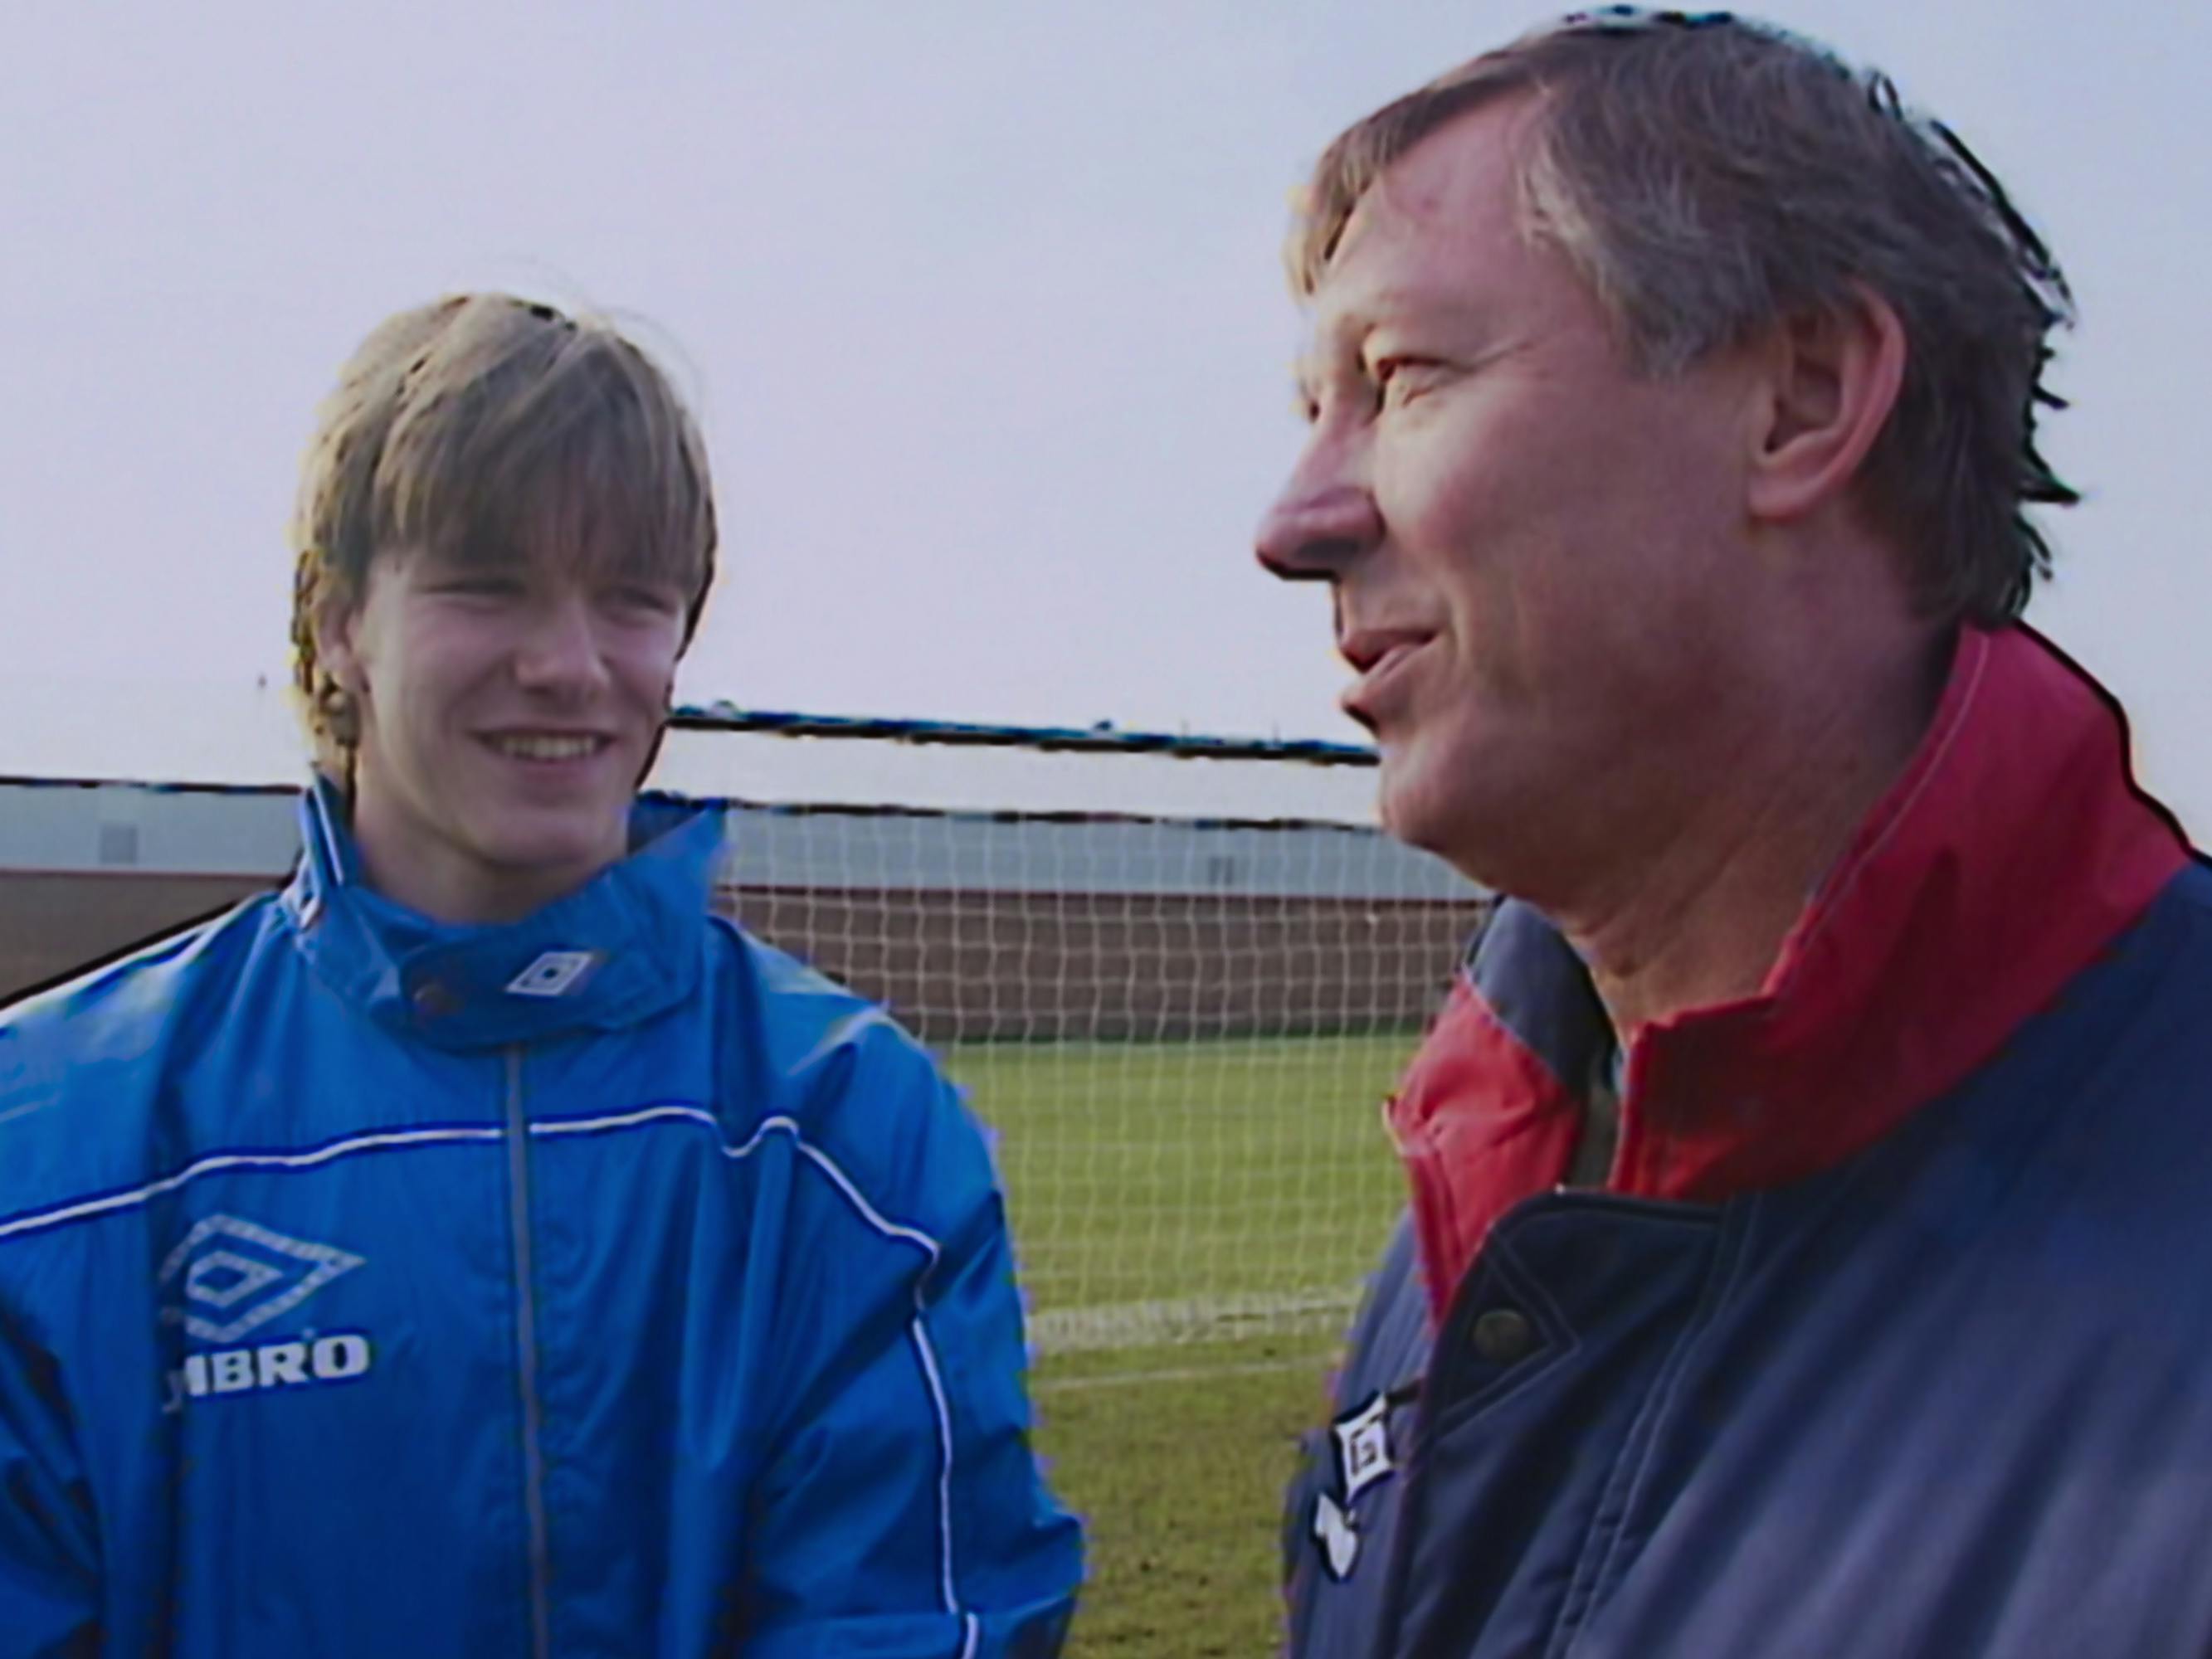 David Beckham and Alex Ferguson stand together on a soccer pitch, wearing blue windbreakers. 